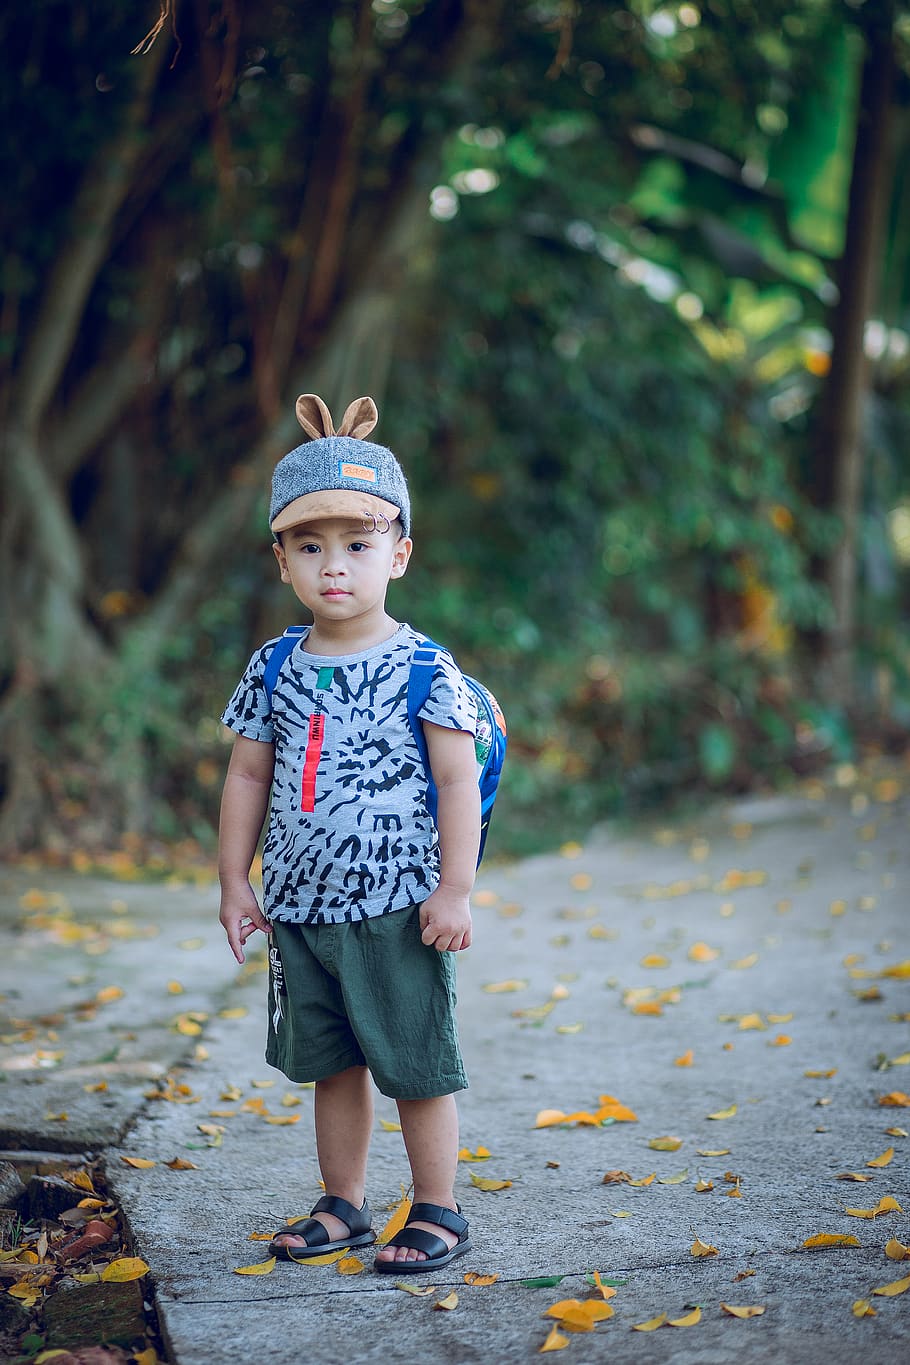 Boy Wearing Shirt and Backpack Standing on Concrete Pathway, adorable